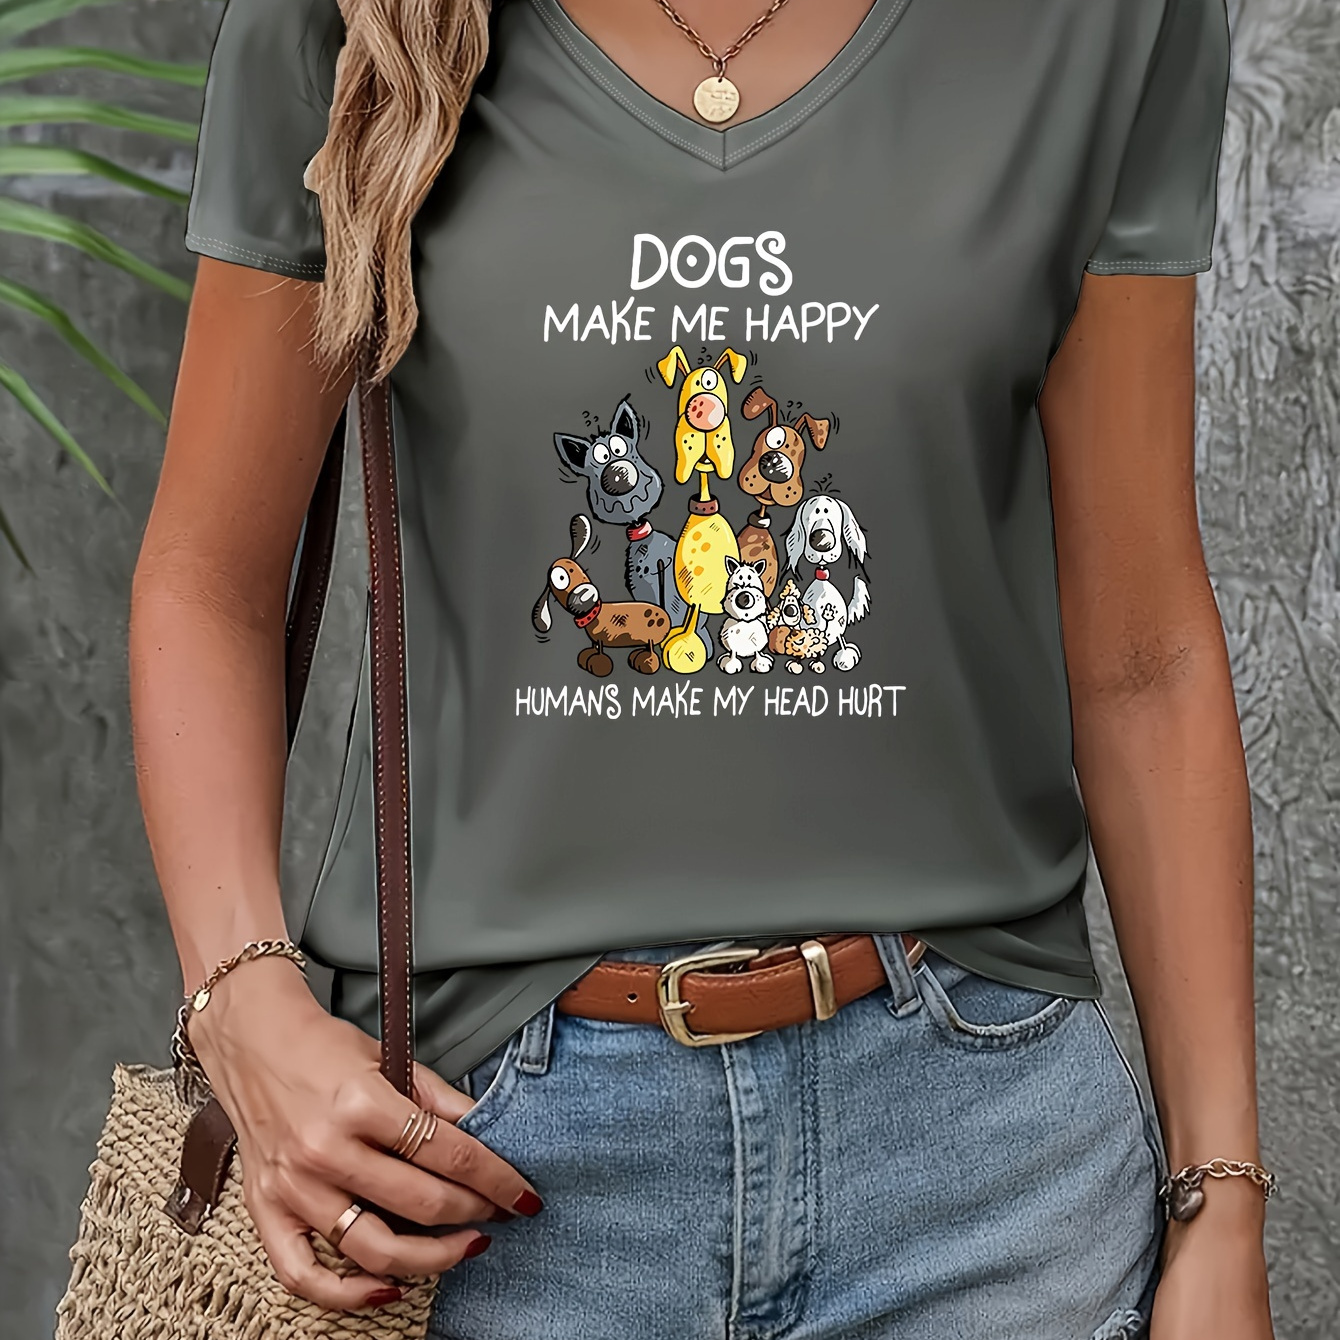 

Women's Casual V-neck Short Sleeve T-shirt, Cute Animal Graphic Print, Funny Lettering "dogs Make Me Happy" Summer Tee, Athleticlounge Wear